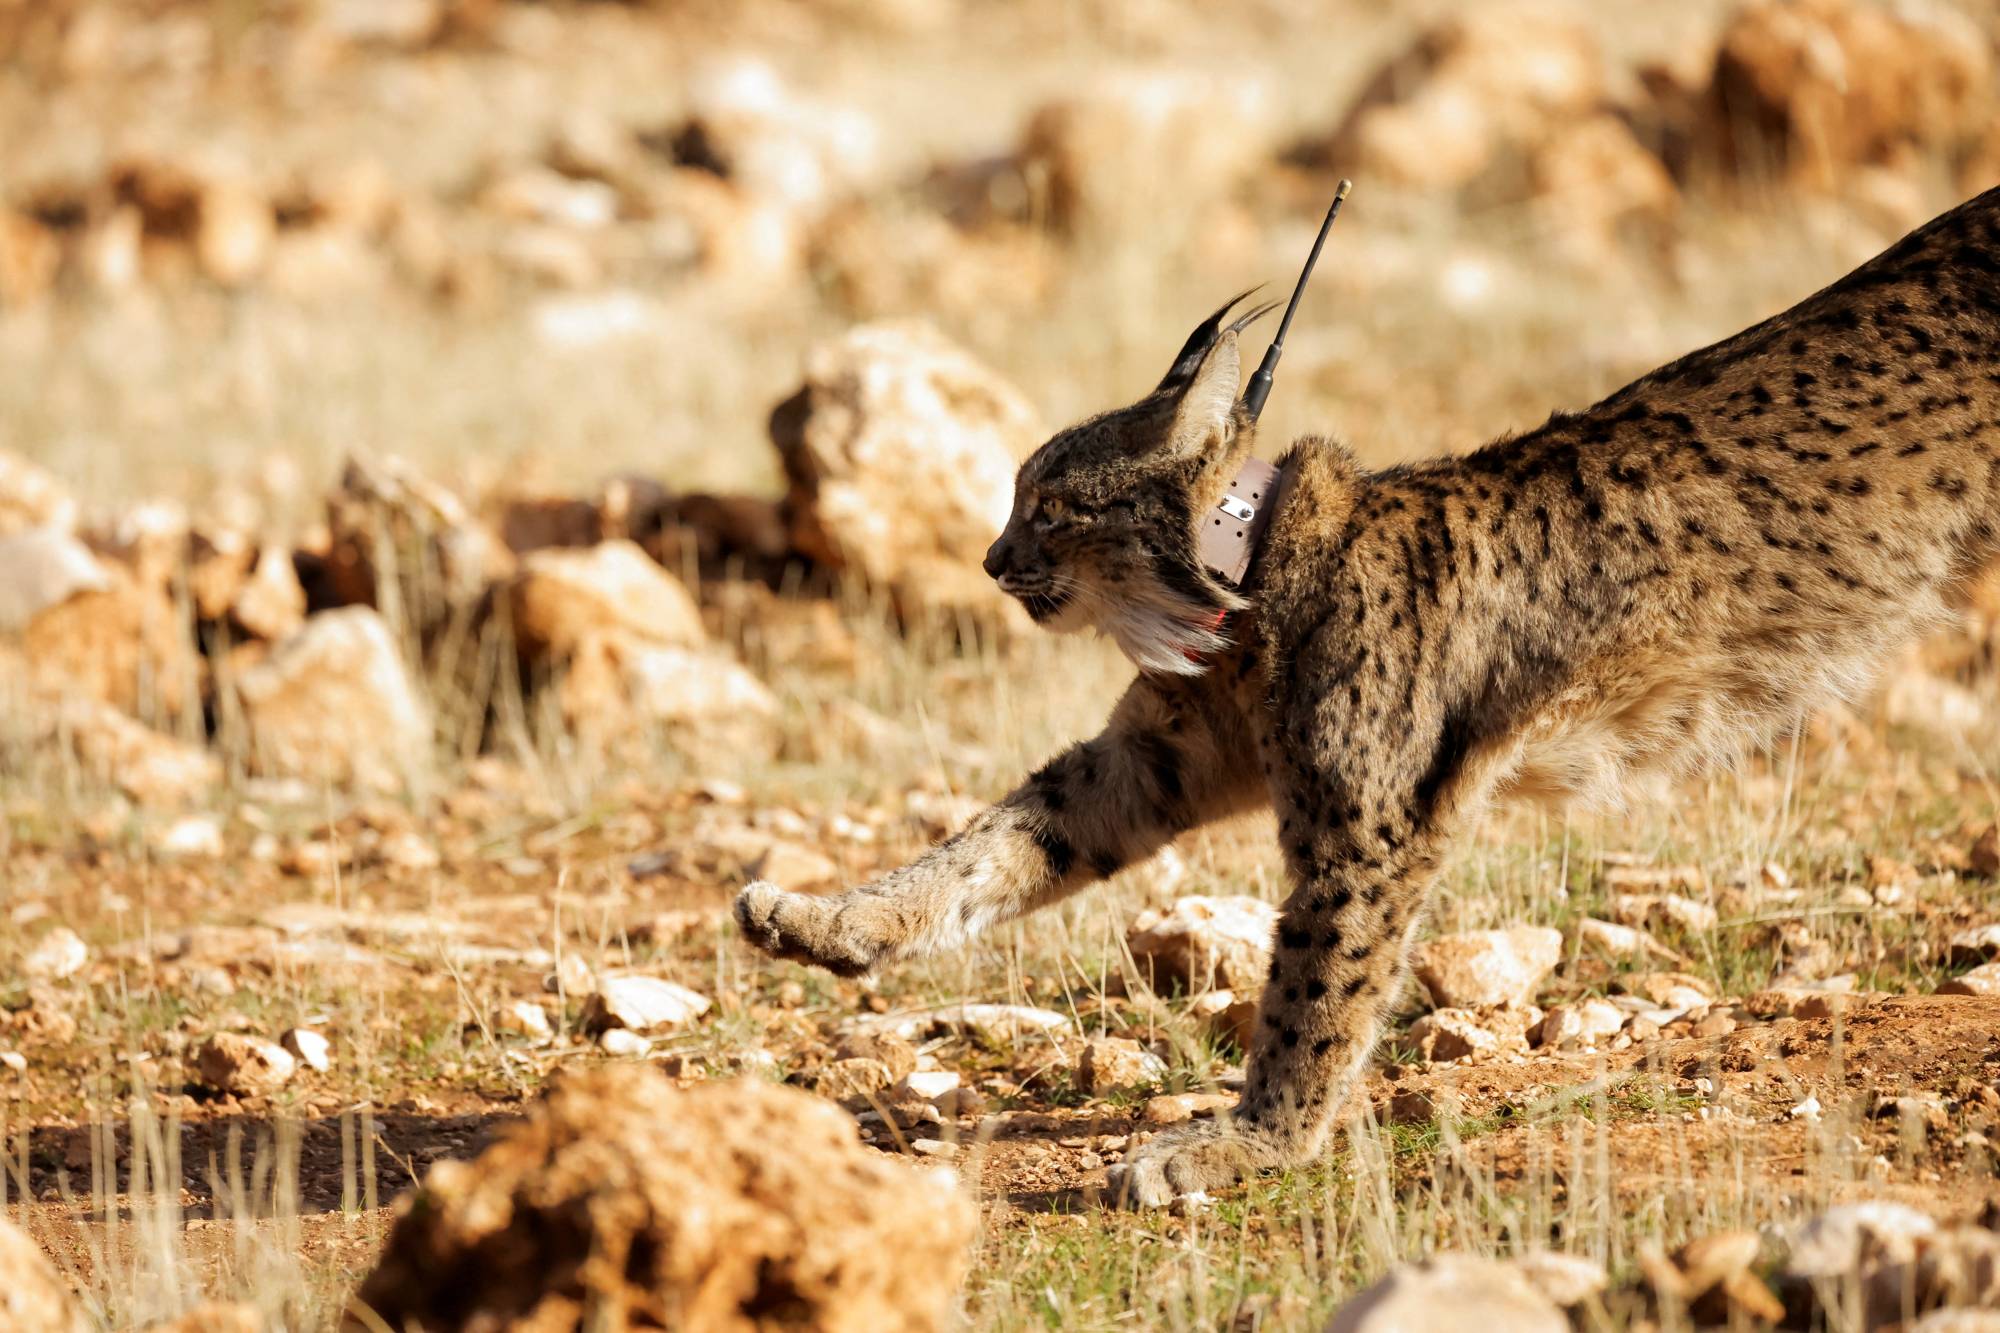 A female Iberian lynx, a feline in danger of extinction, is released with four other lynxes as part of a project to recover this species in the Arana mountain range, in Iznalloz, near Granada, southern Spain, on Dec. 19. | REUTERS